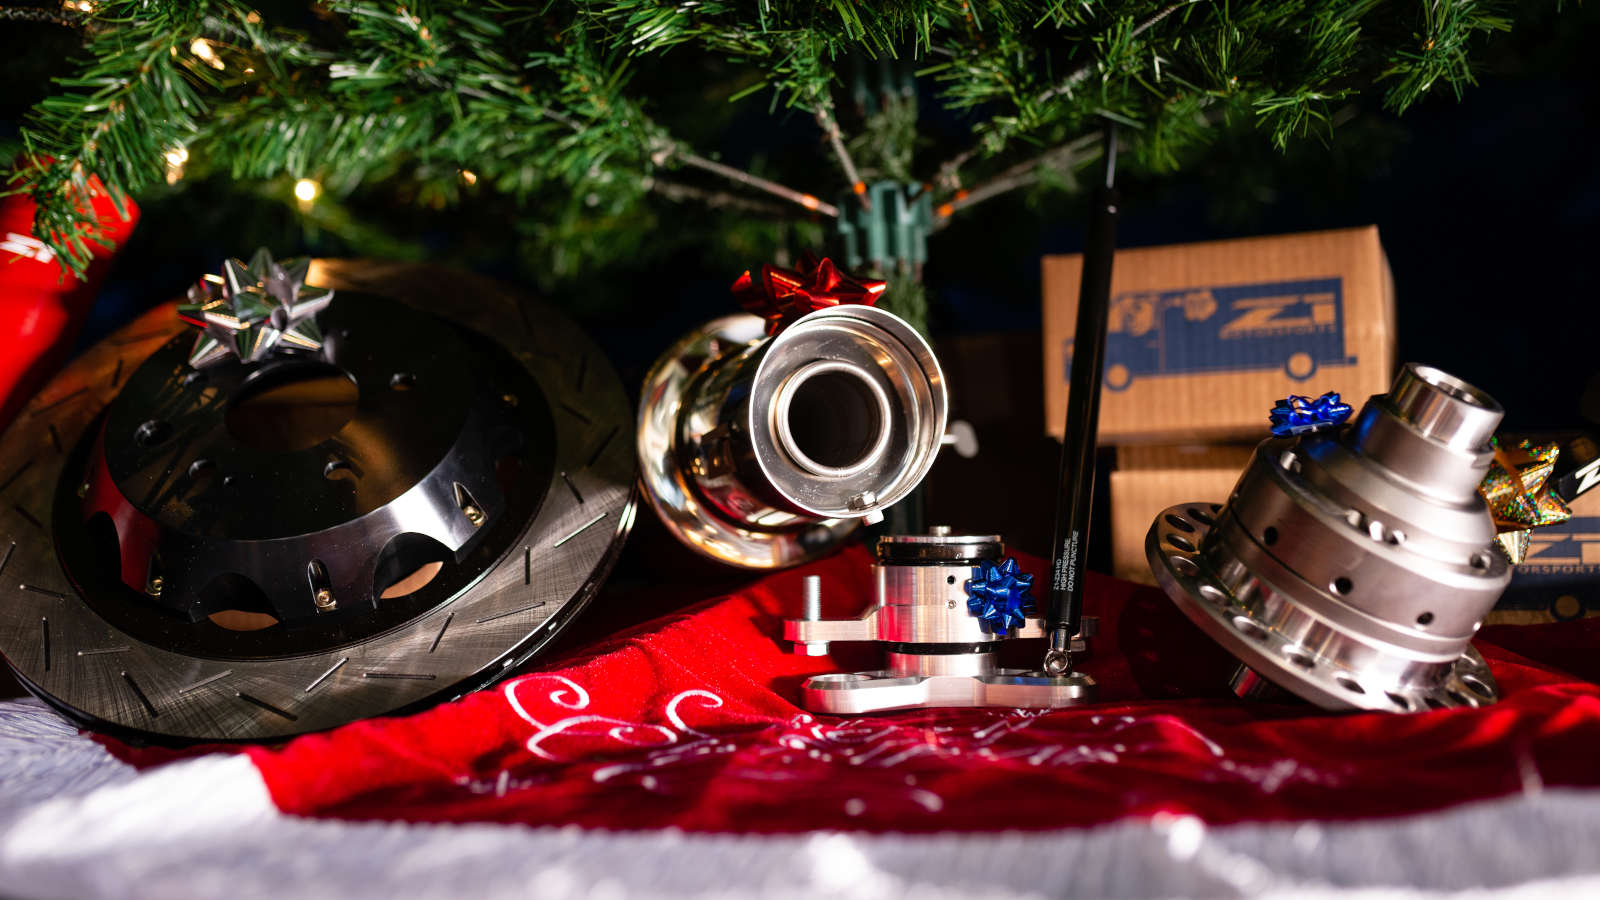 'TIS THE SEASON Spread some cheer with our massive selection of Z1 products